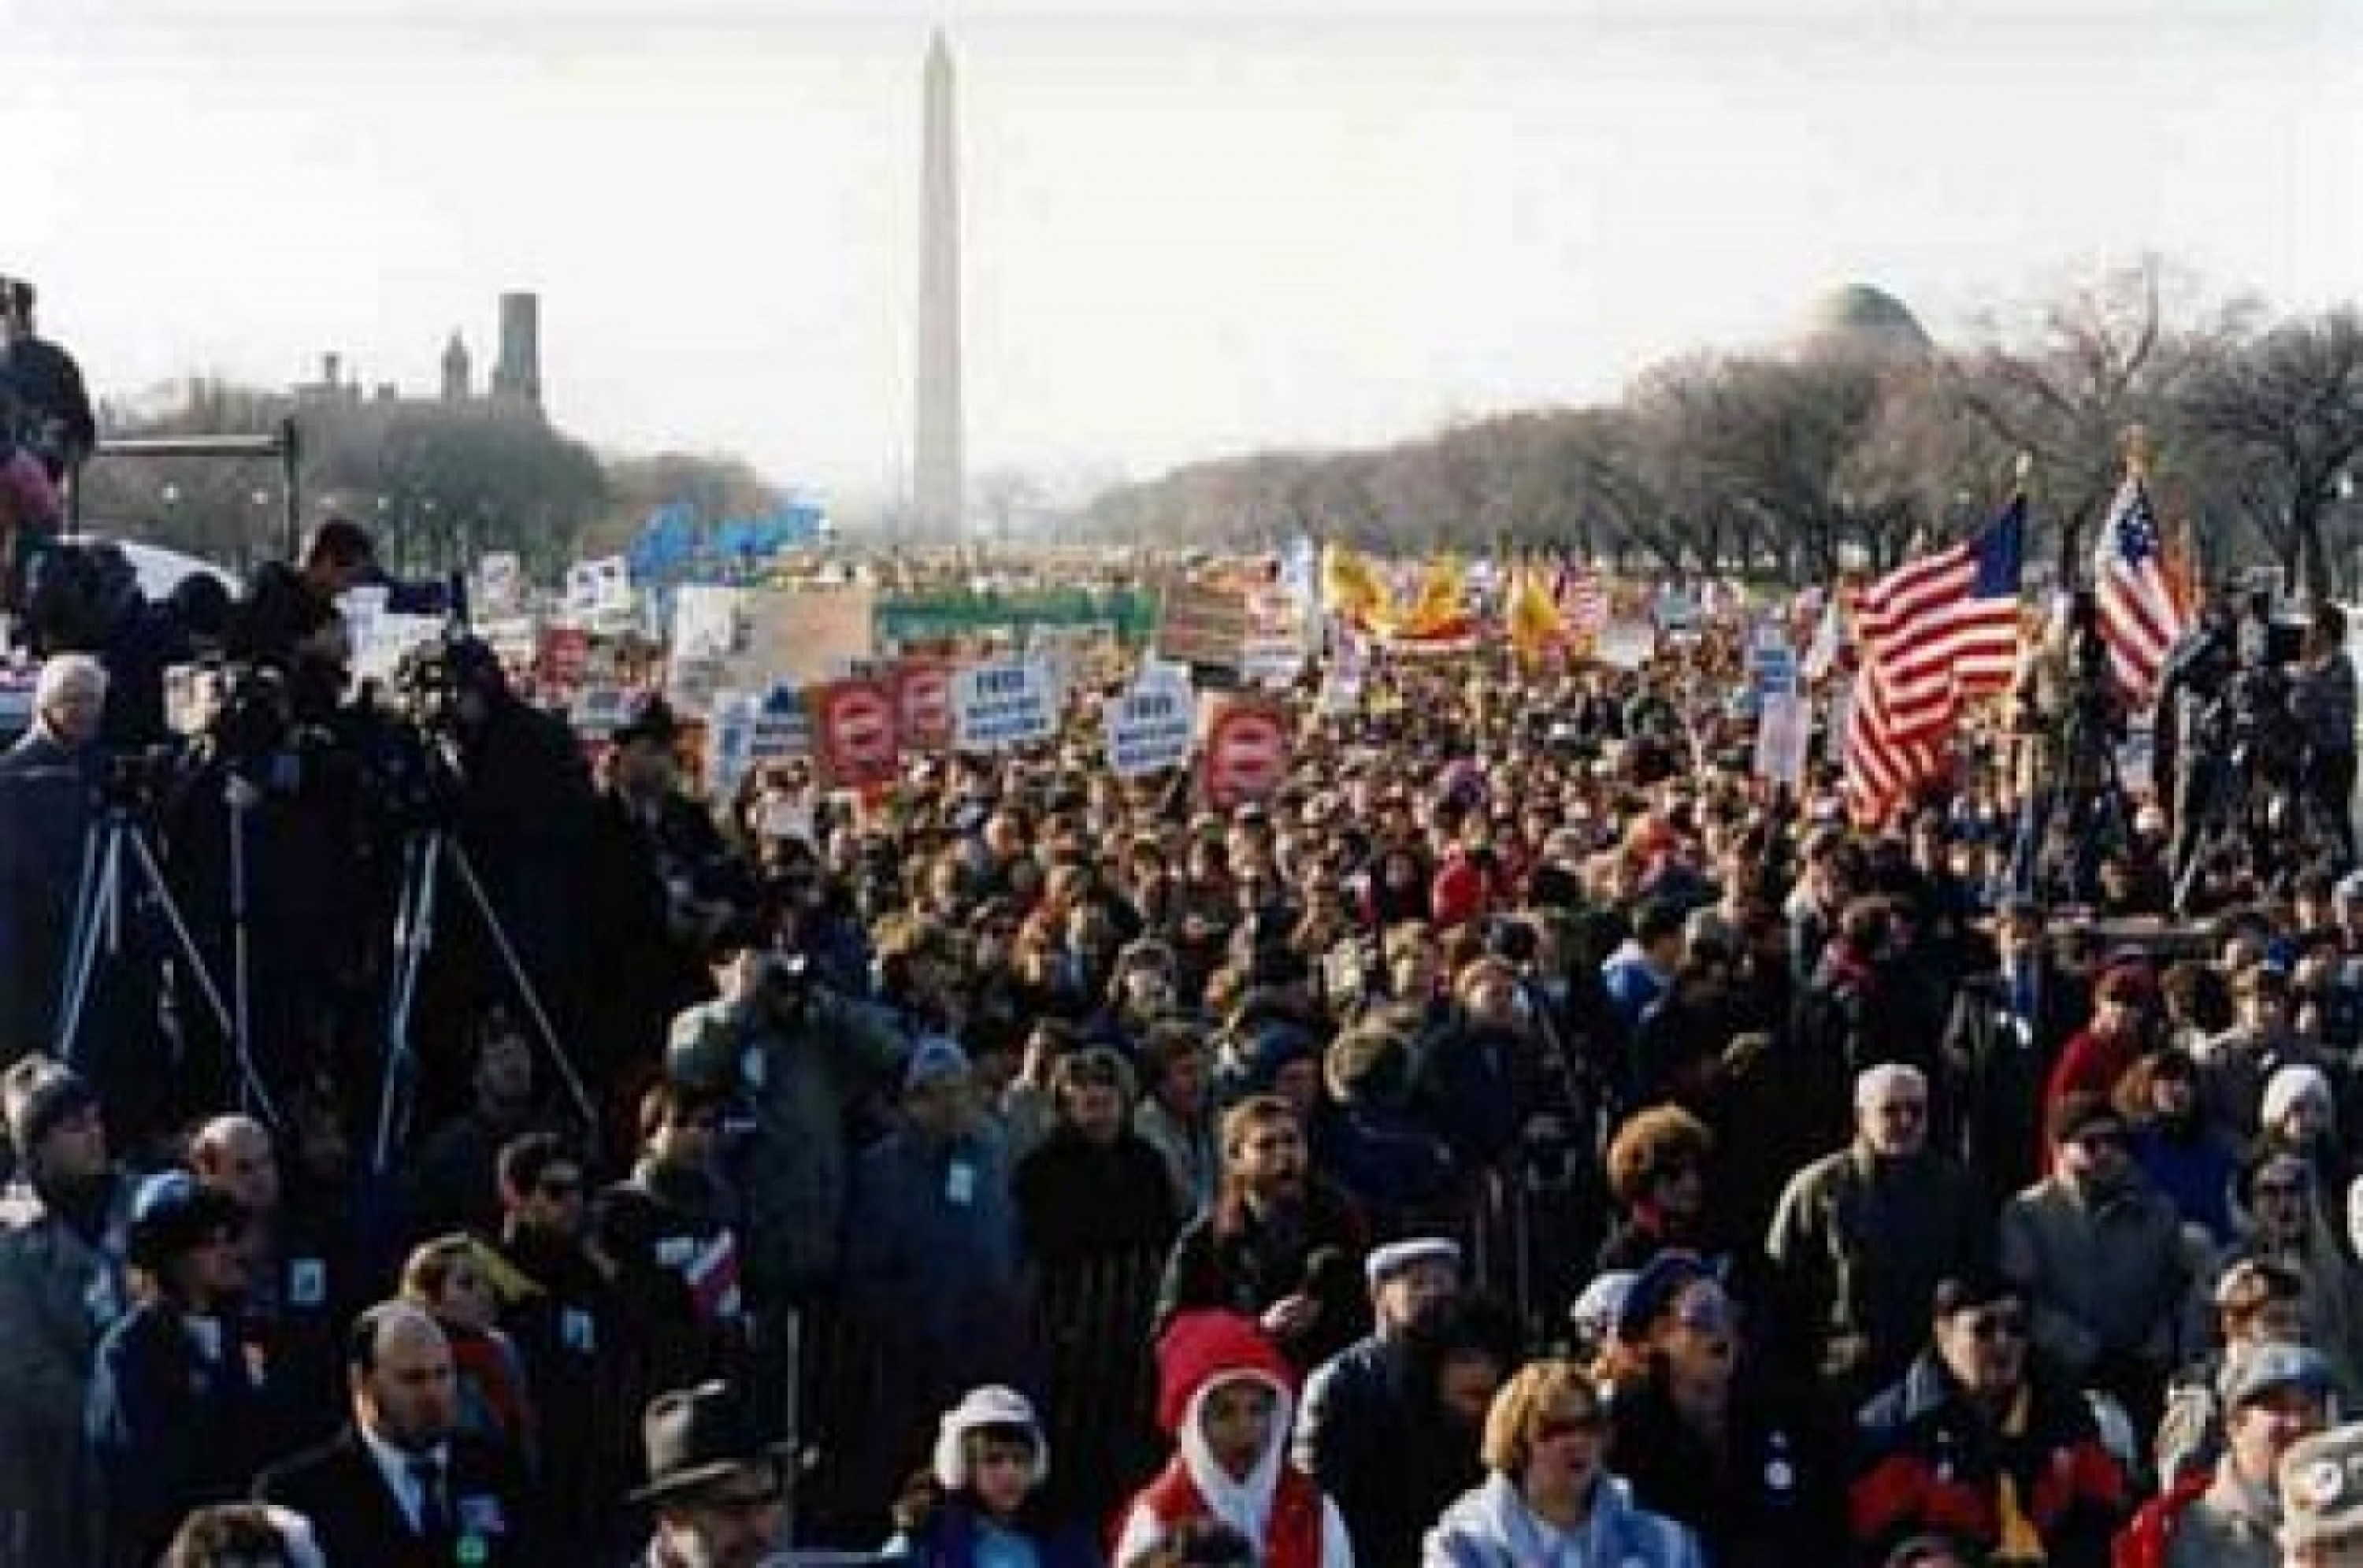 On the eve of Mikhail Gorbachev's first visit to the US in 1987, 250,000 people marched on Washington demanding freedom for Soviet Jews (photo credit: Courtesy Joshua Hammerman)